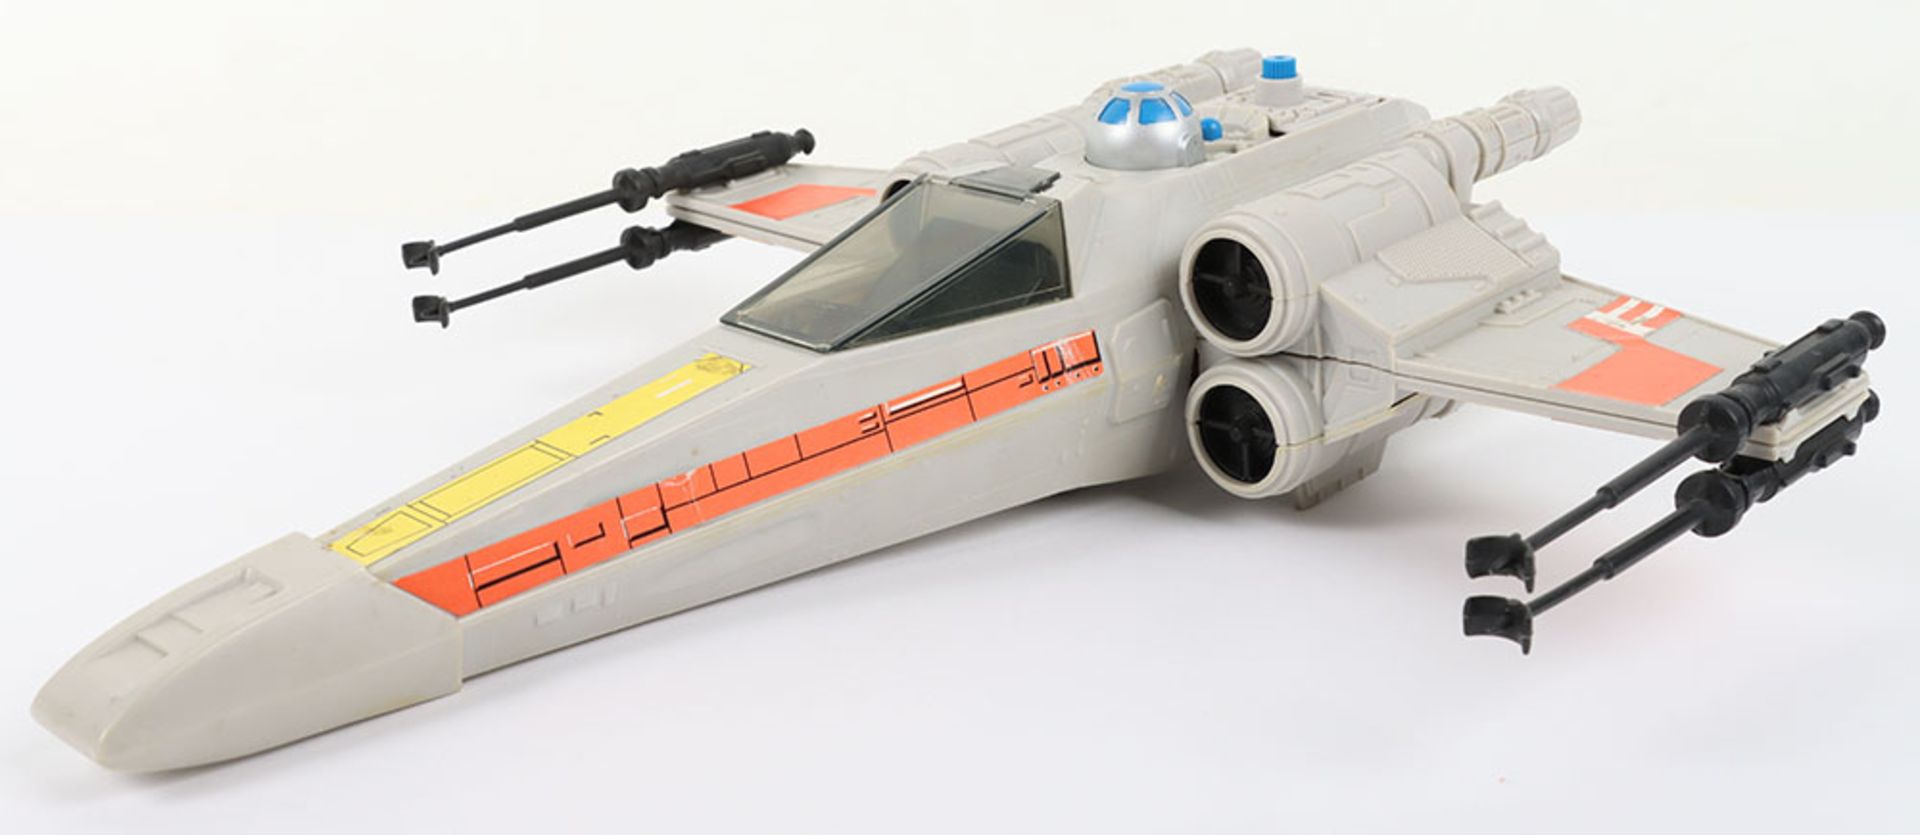 Boxed Vintage Palitoy Star Wars The Empire Strikes Back Battle Damaged X-Wing Fighter - Image 2 of 8